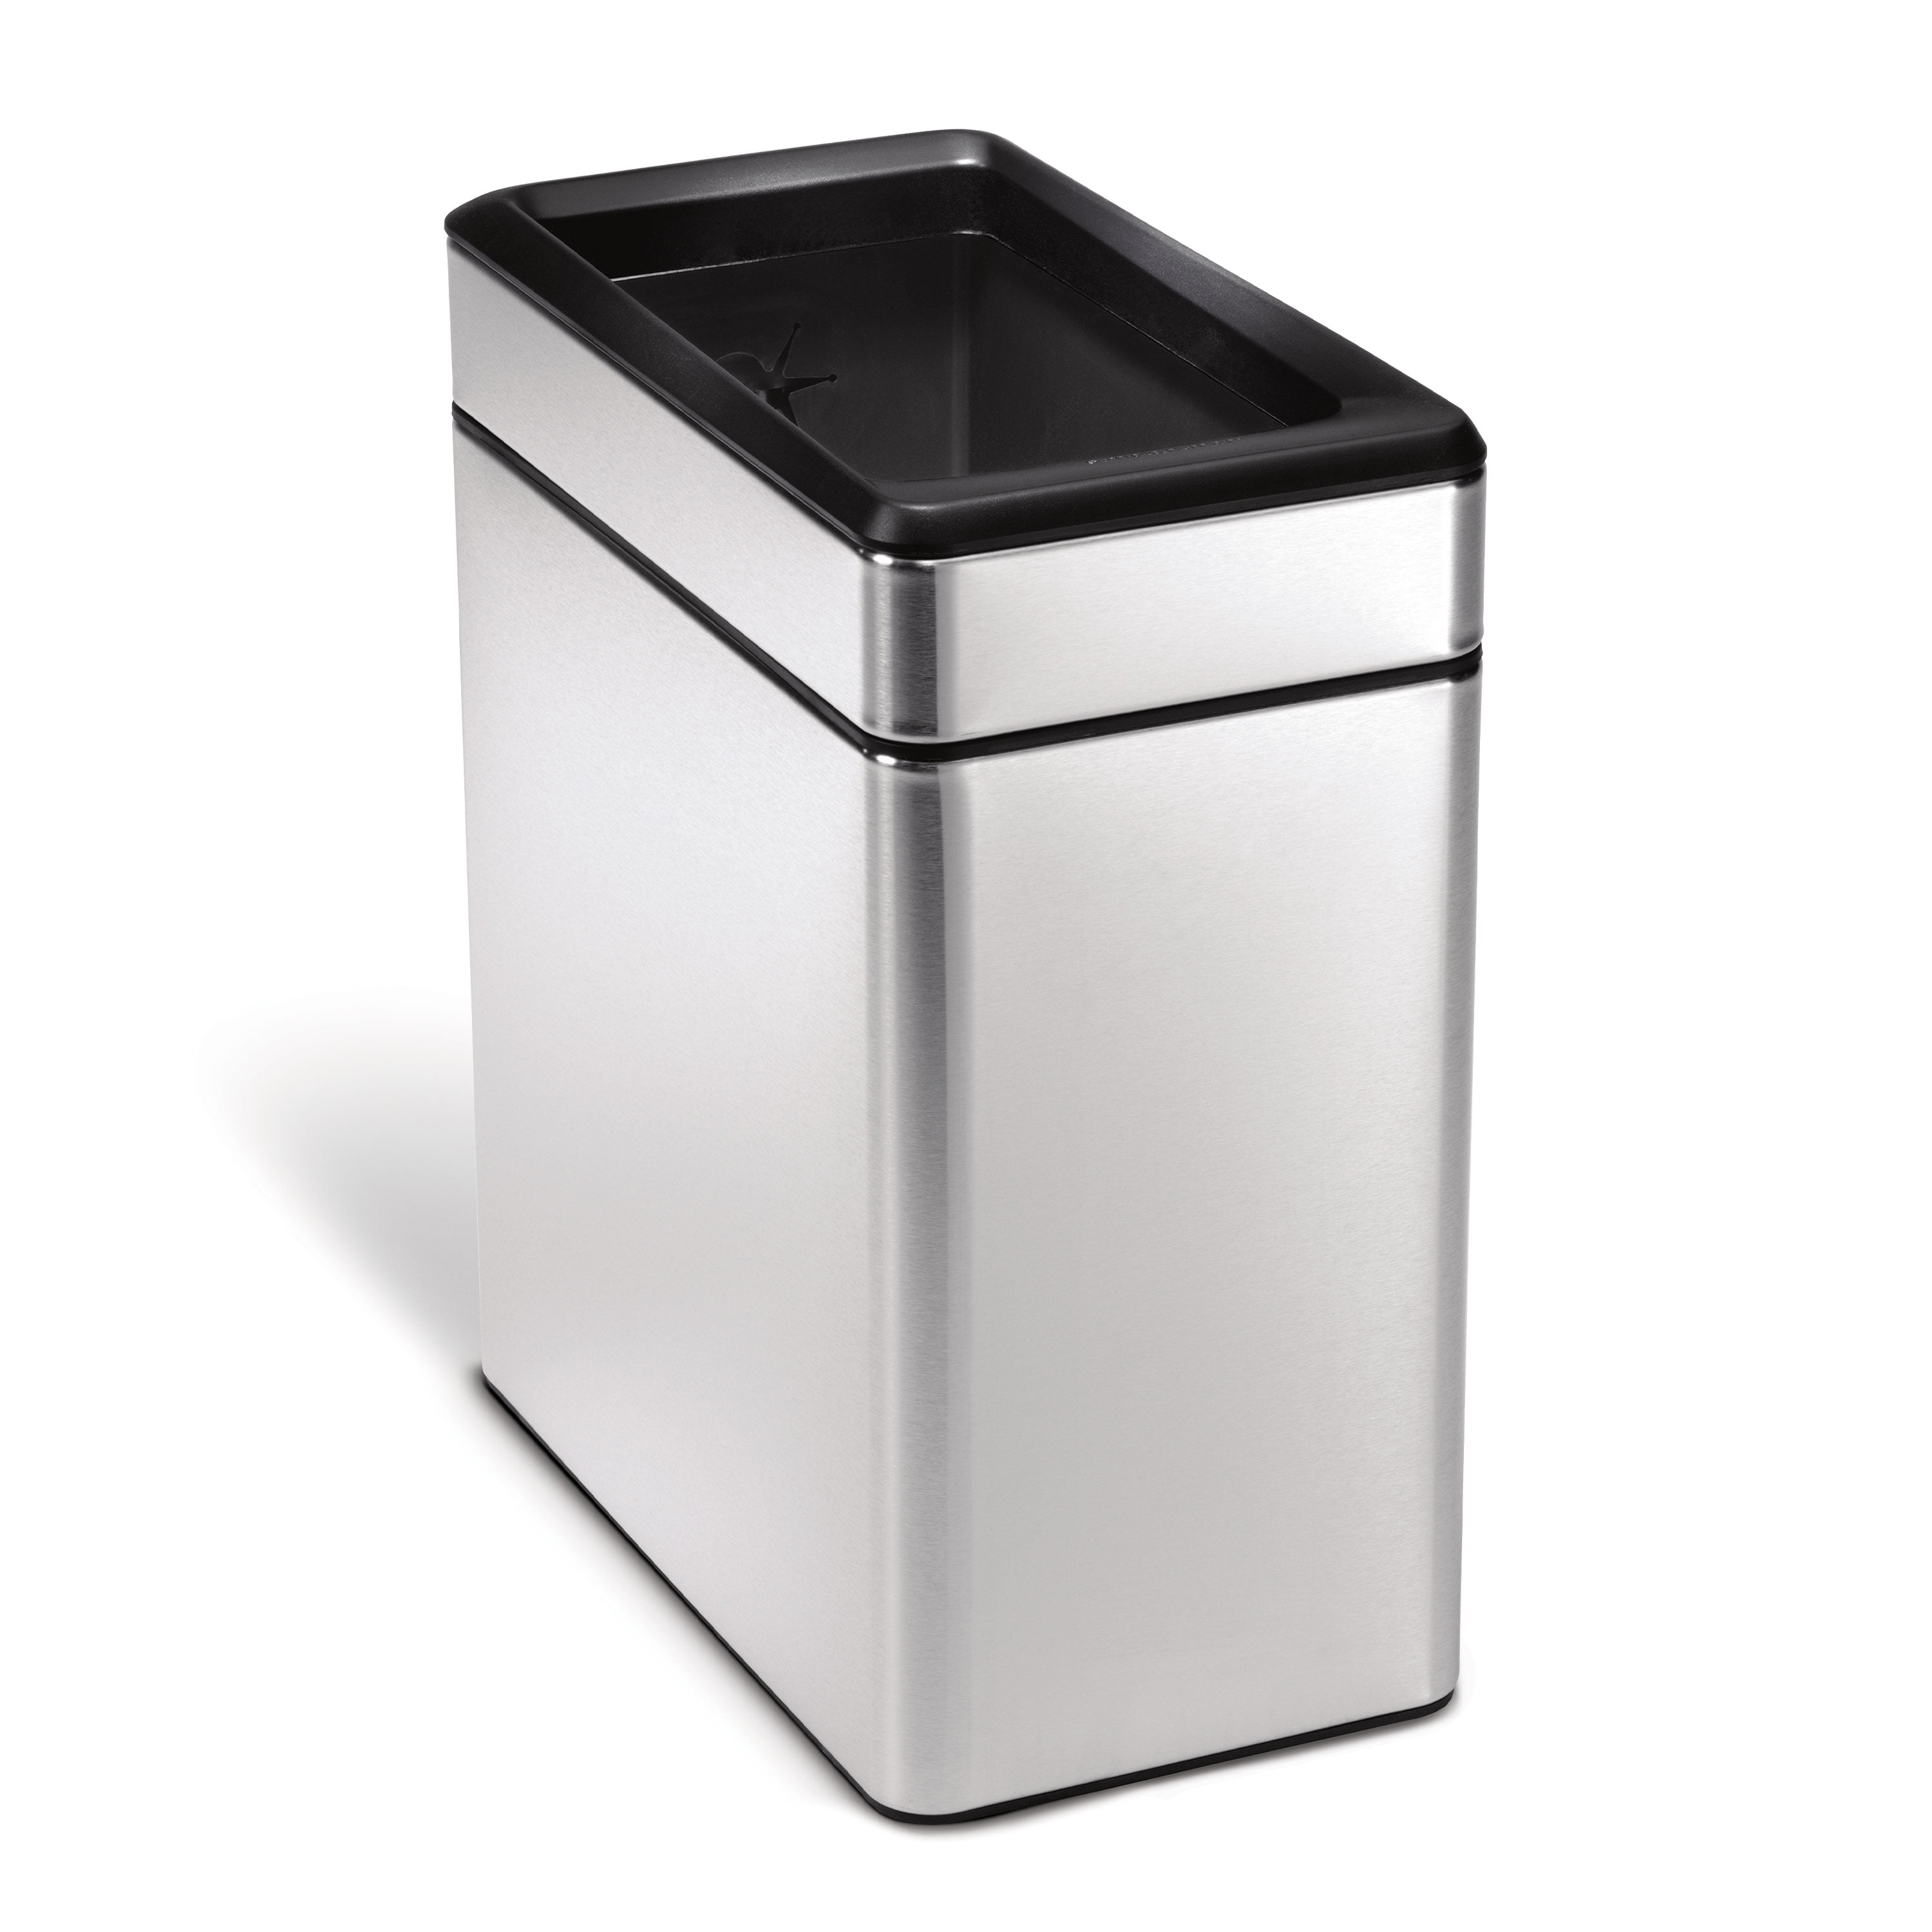 simplehuman 2.6 Gallon Bathroom Profile Open Trash Can, Brushed Stainless Steel Bathroom Garbage Can